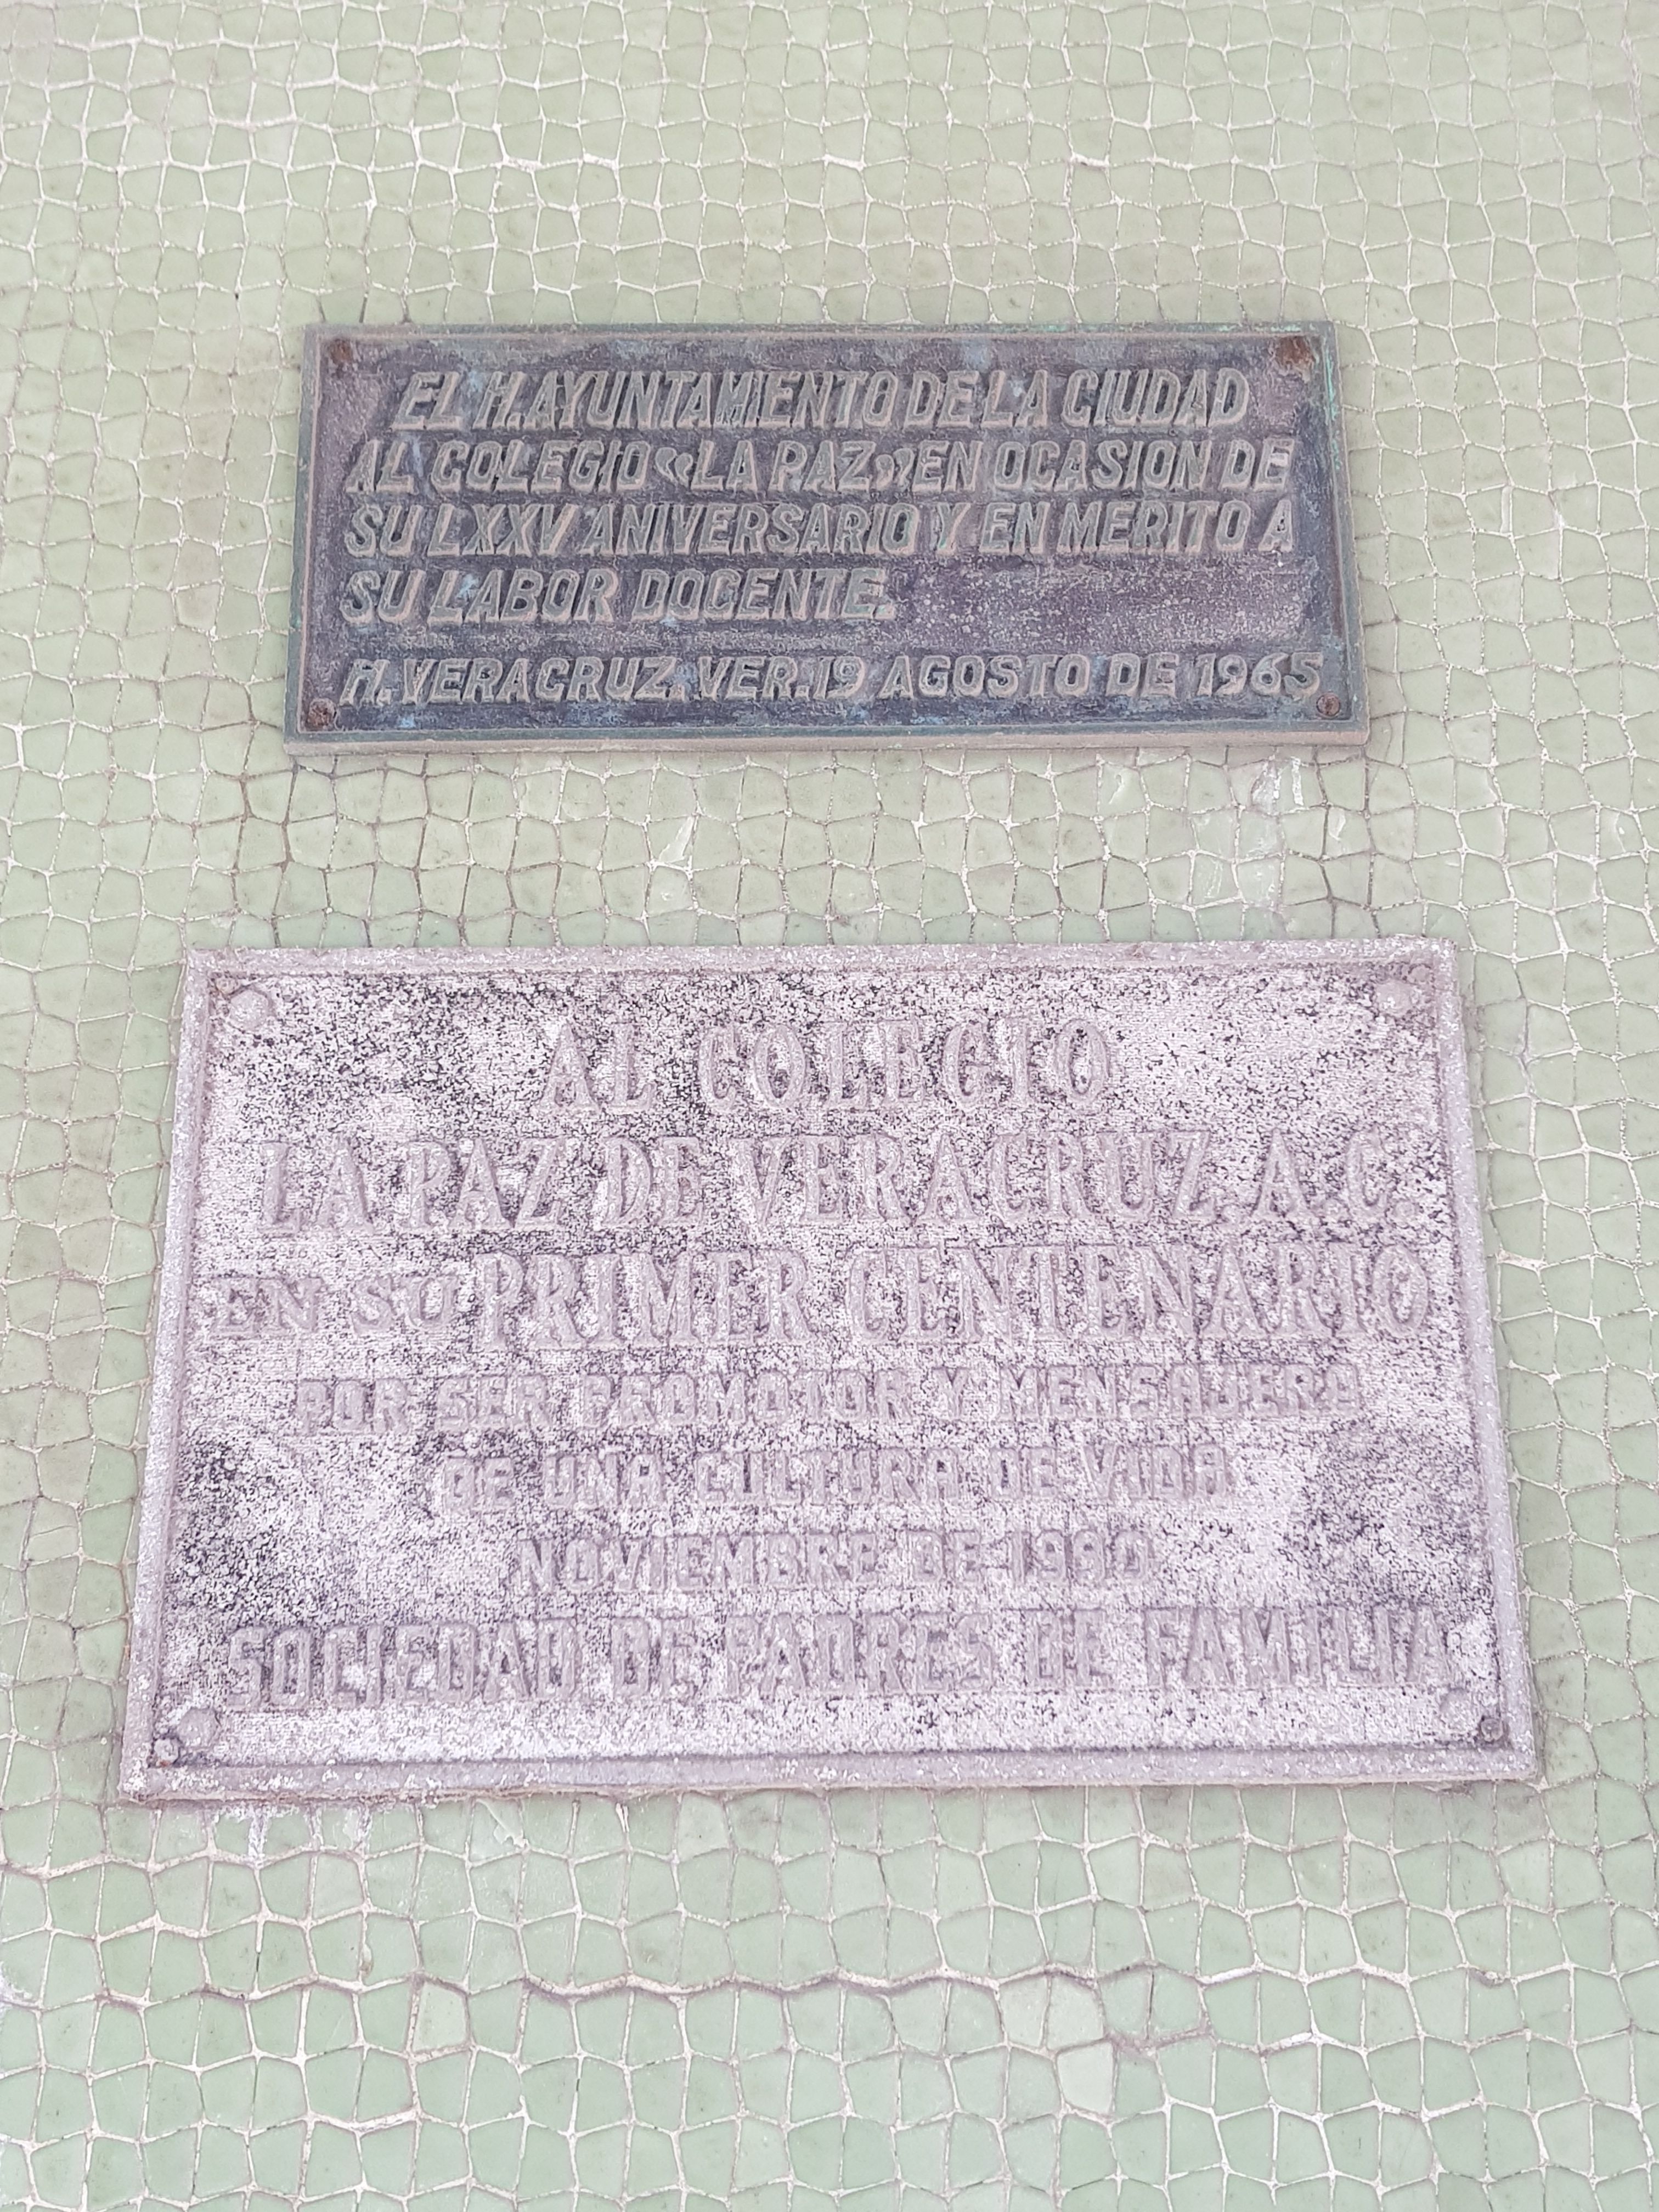 Additional markers for the "La Paz" School, founded in 1890